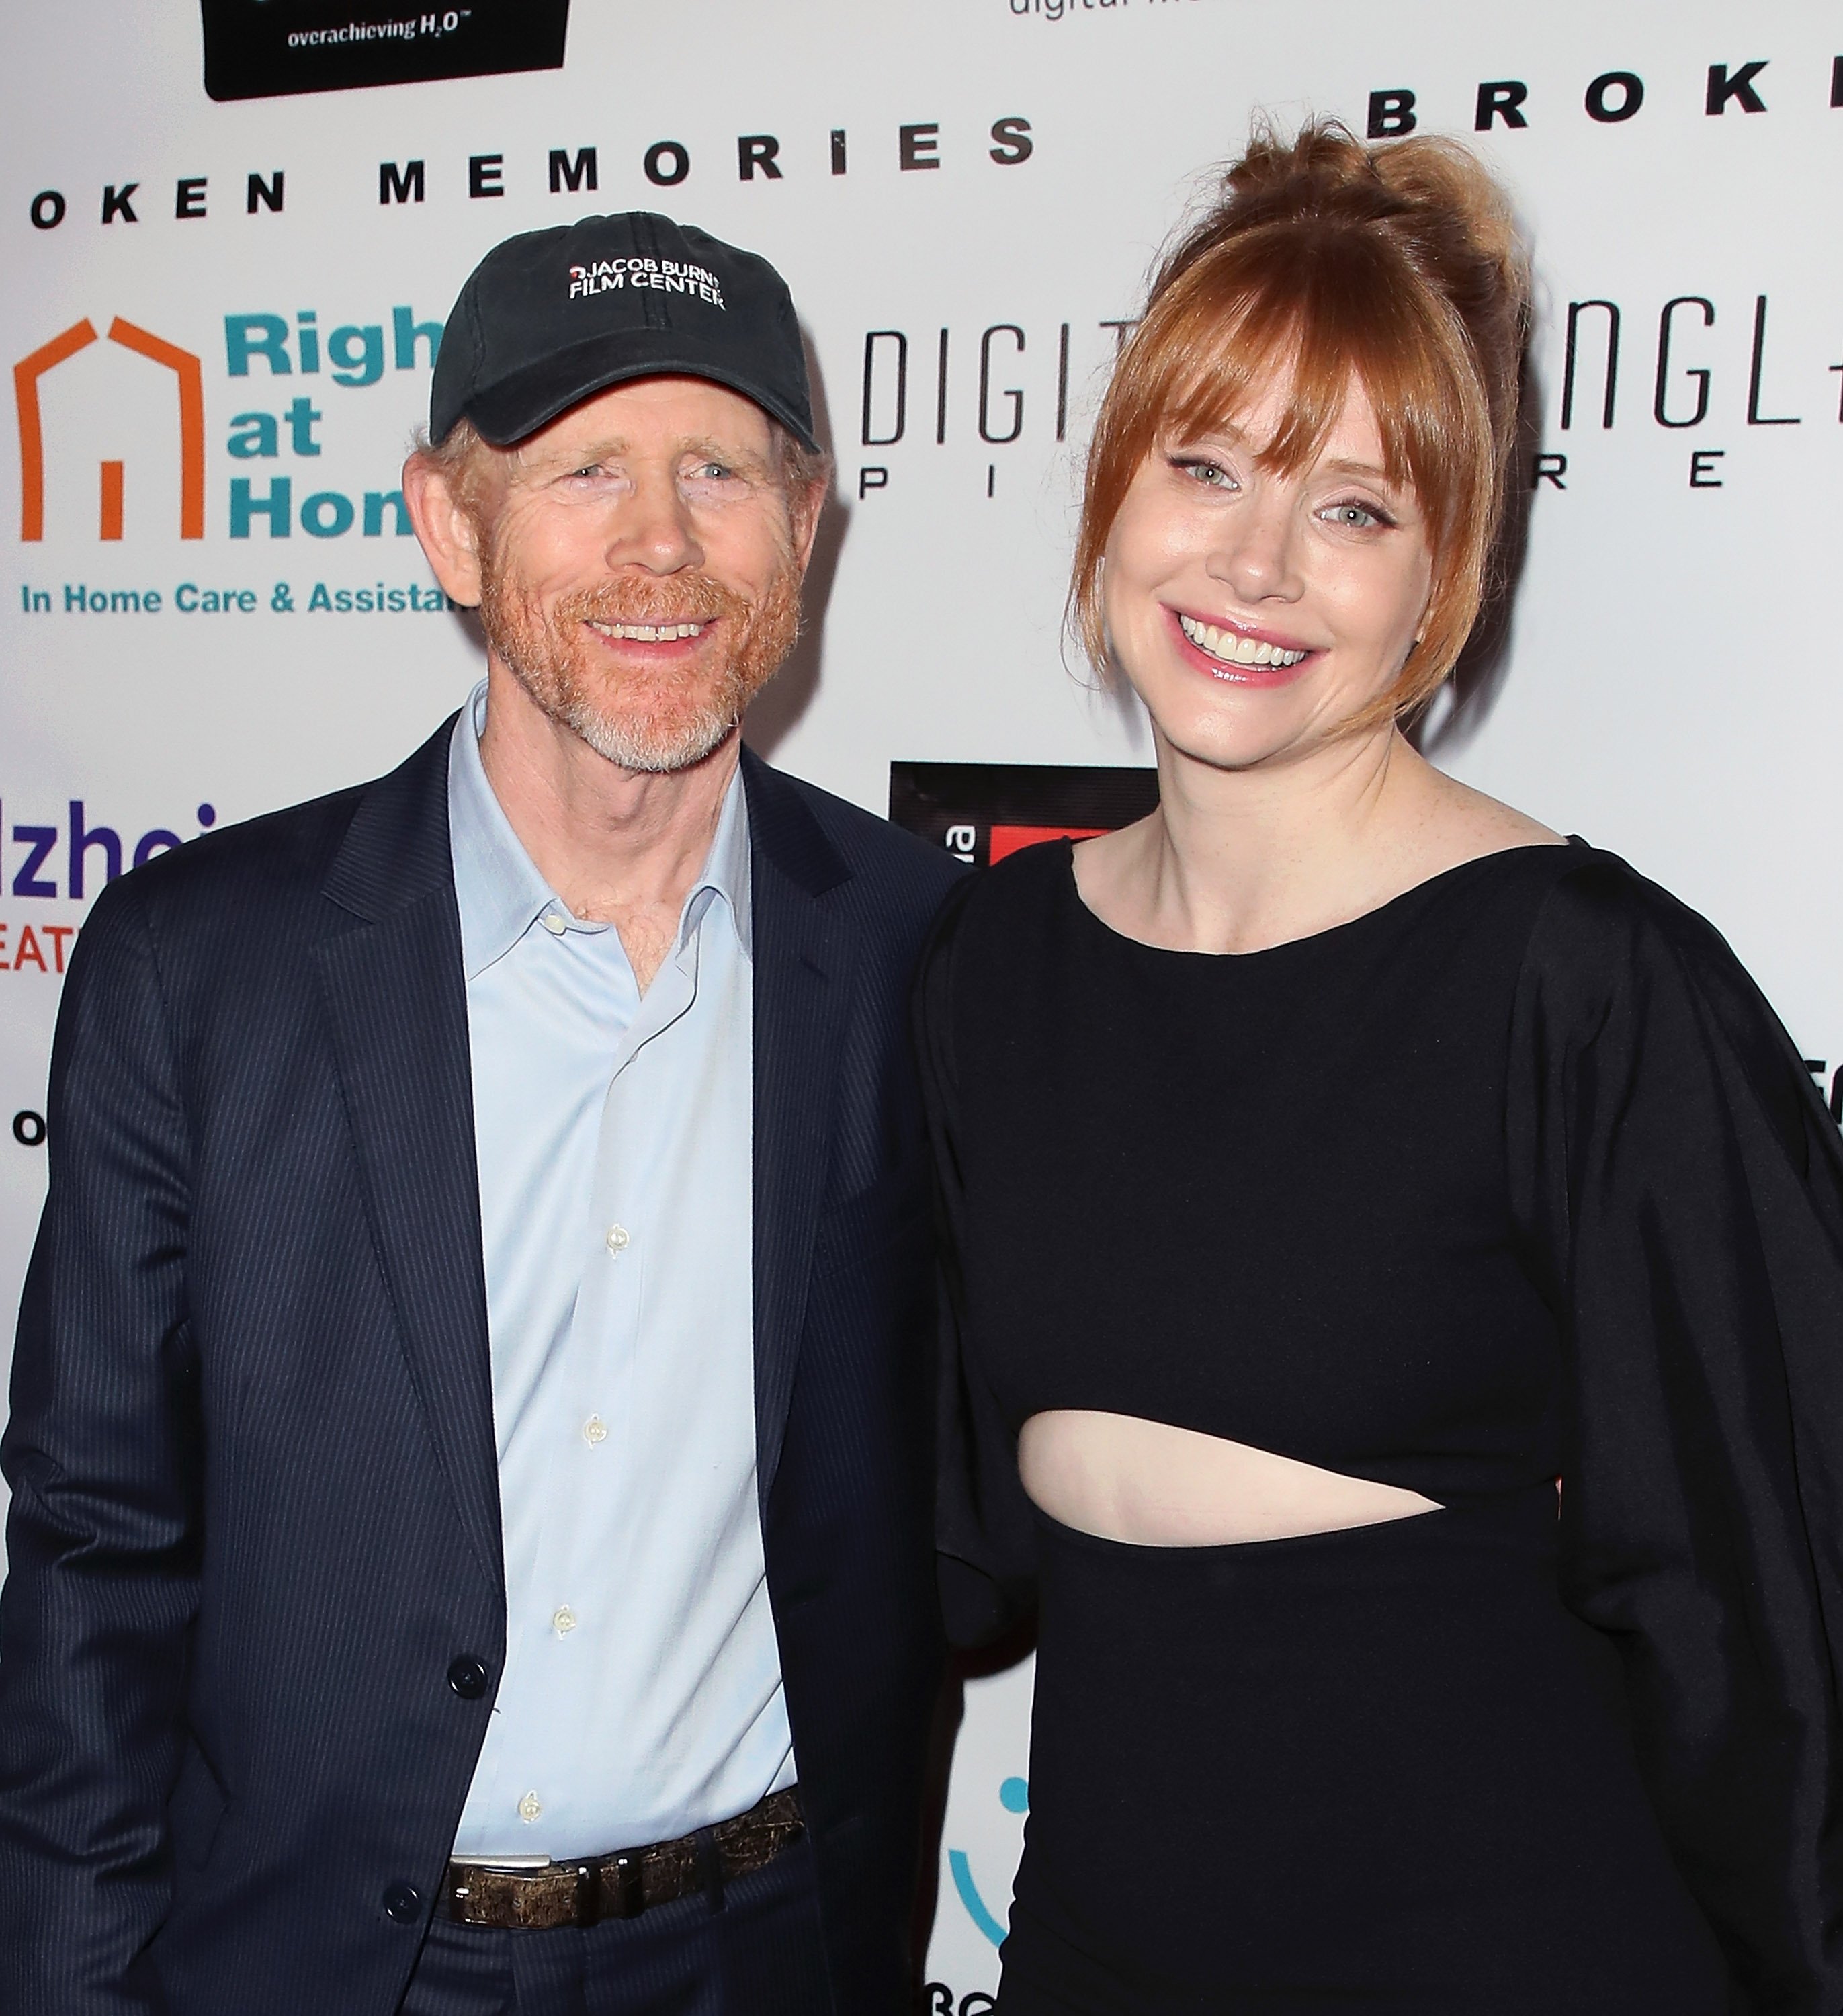 Ron Howard and his daughter, Bryce Dallas Howard pictured at a benefit screening of Digital Jungle Pictures' "Broken Memories," 2017, California. | Photo: Getty Images